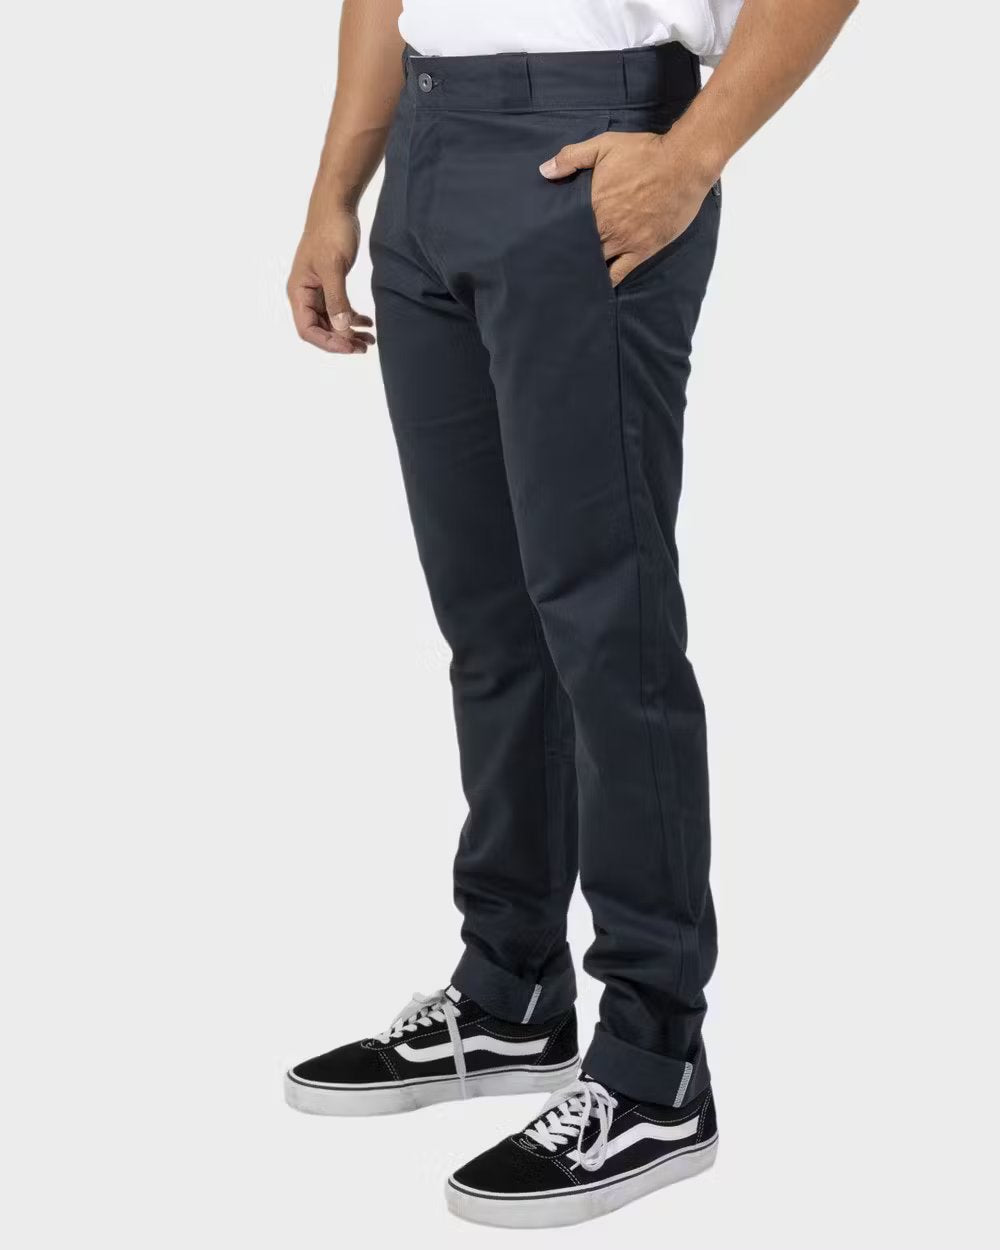 Dagger Slim Fit Twill Pants - Mobaco